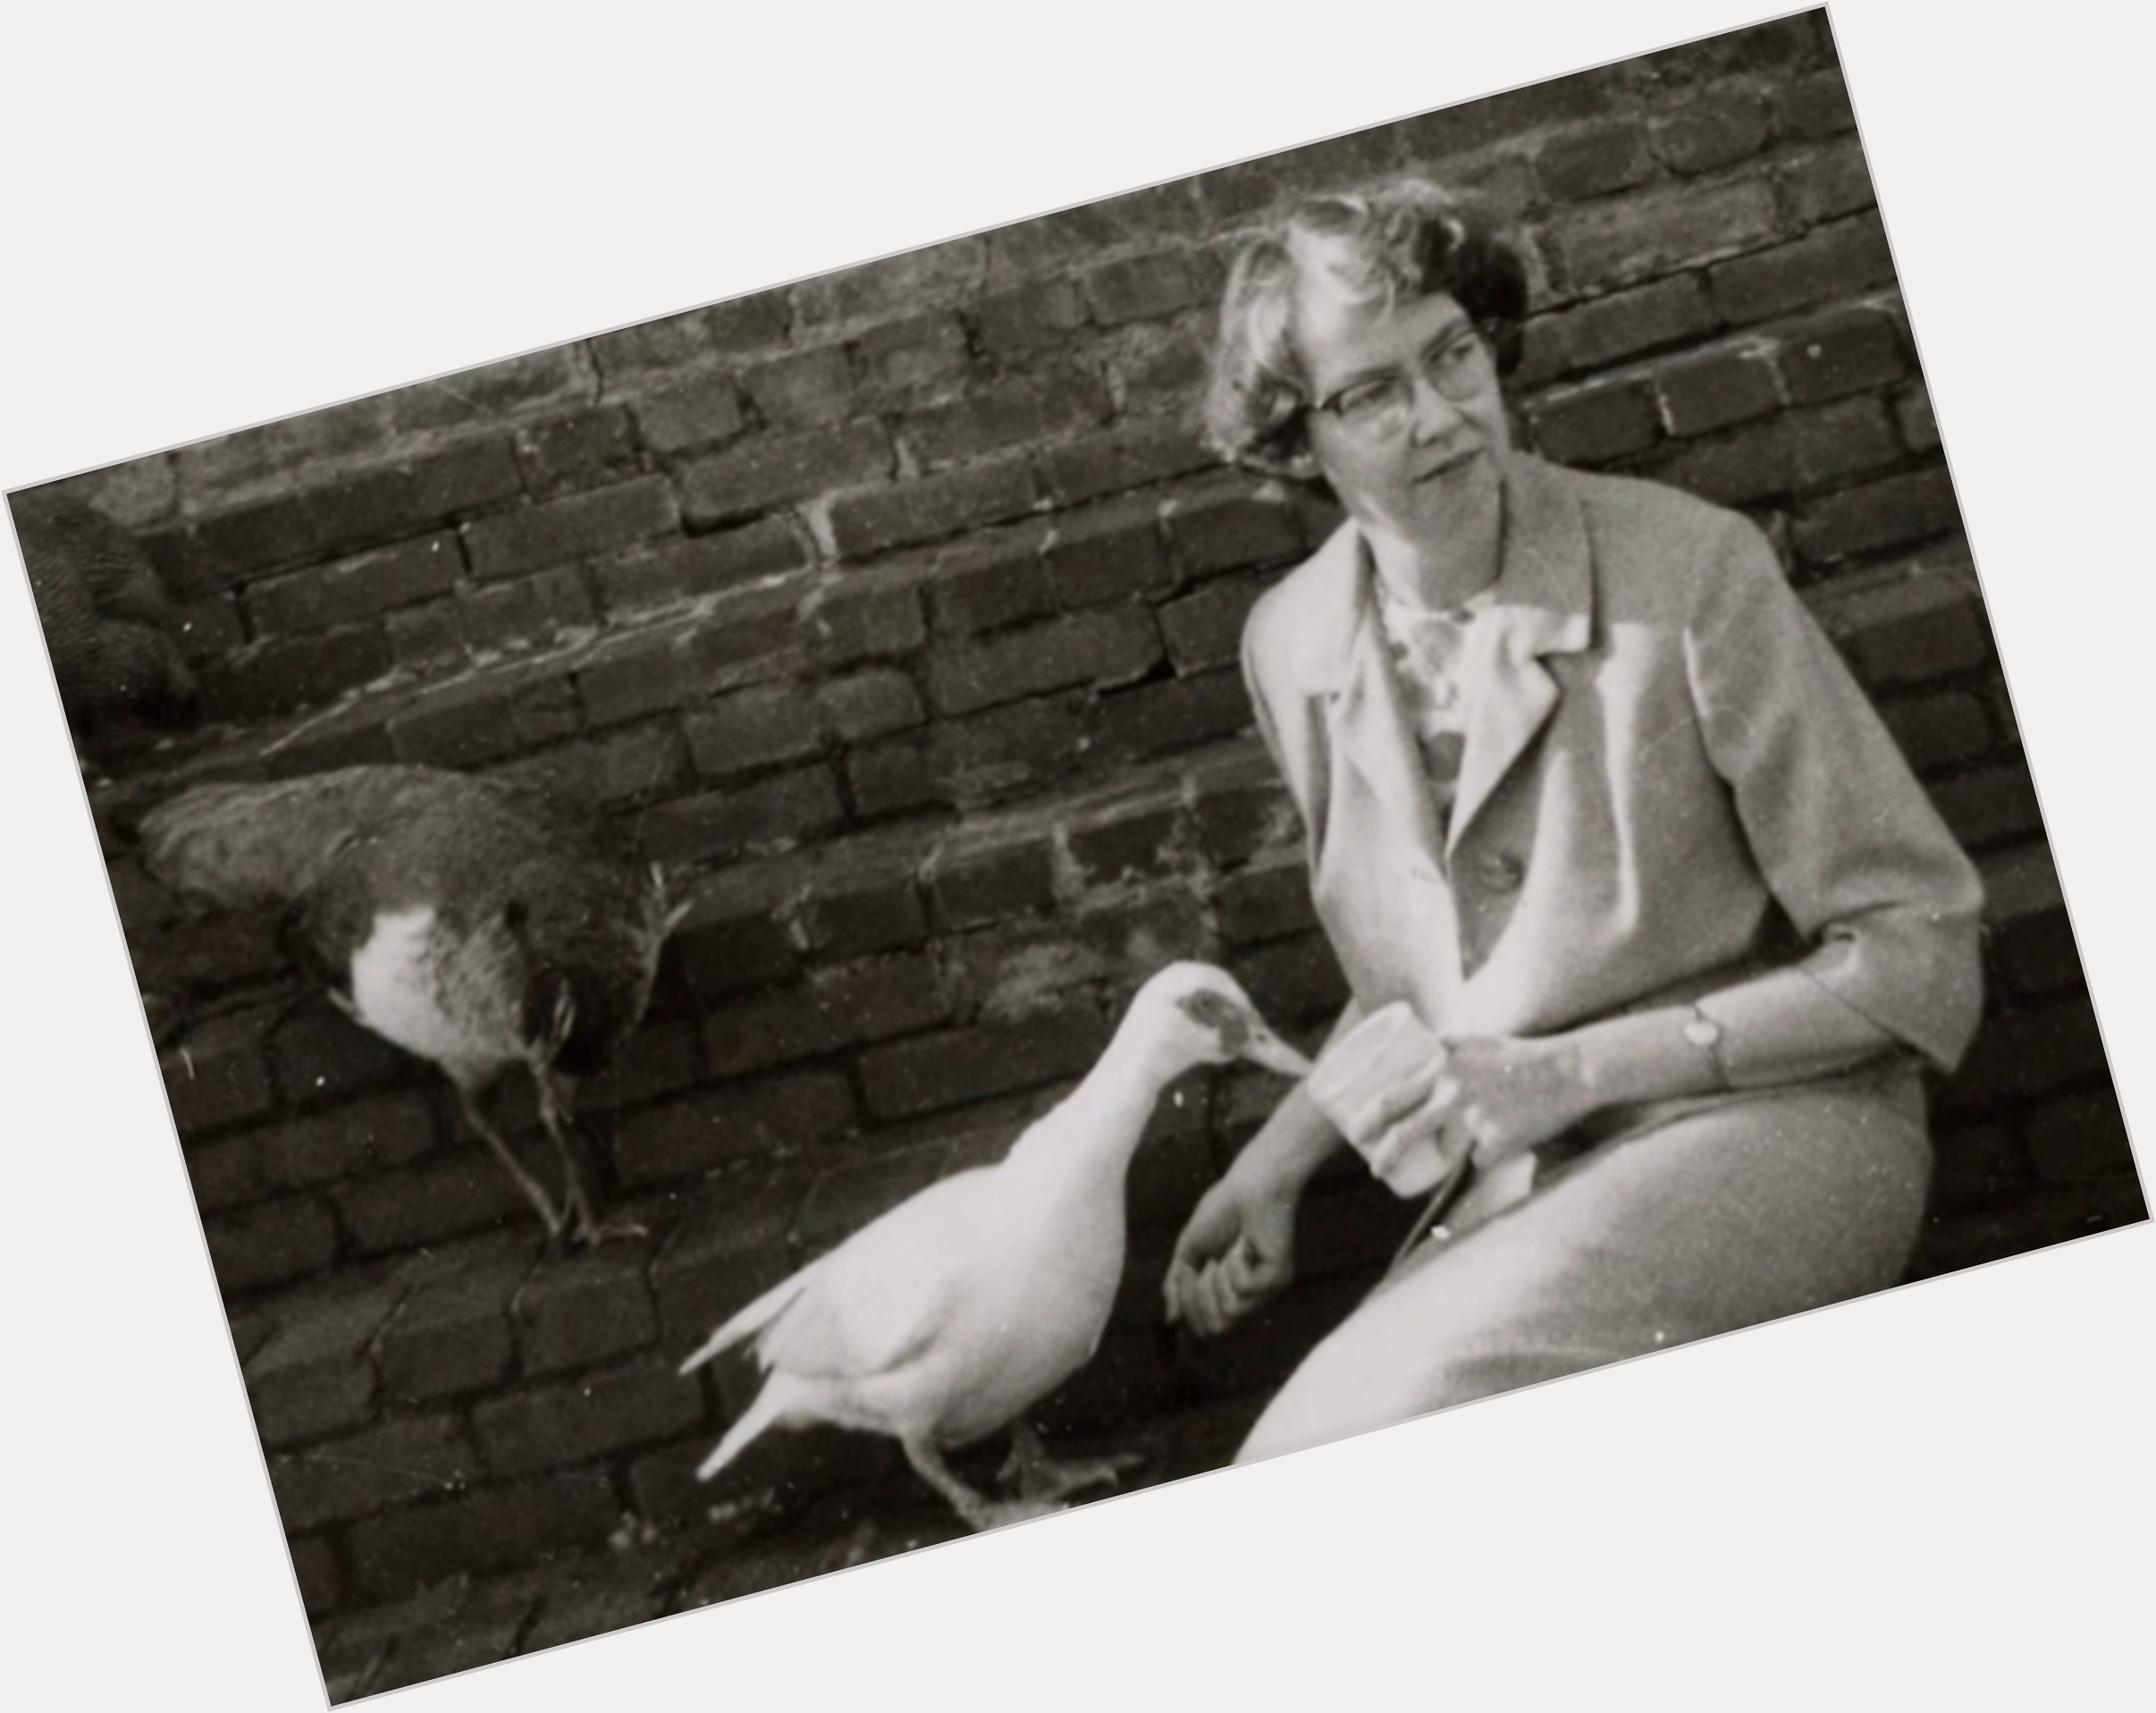 <a href="/hot-women/flannery-o-connor/where-dating-news-photos">Flannery O Connor</a>  